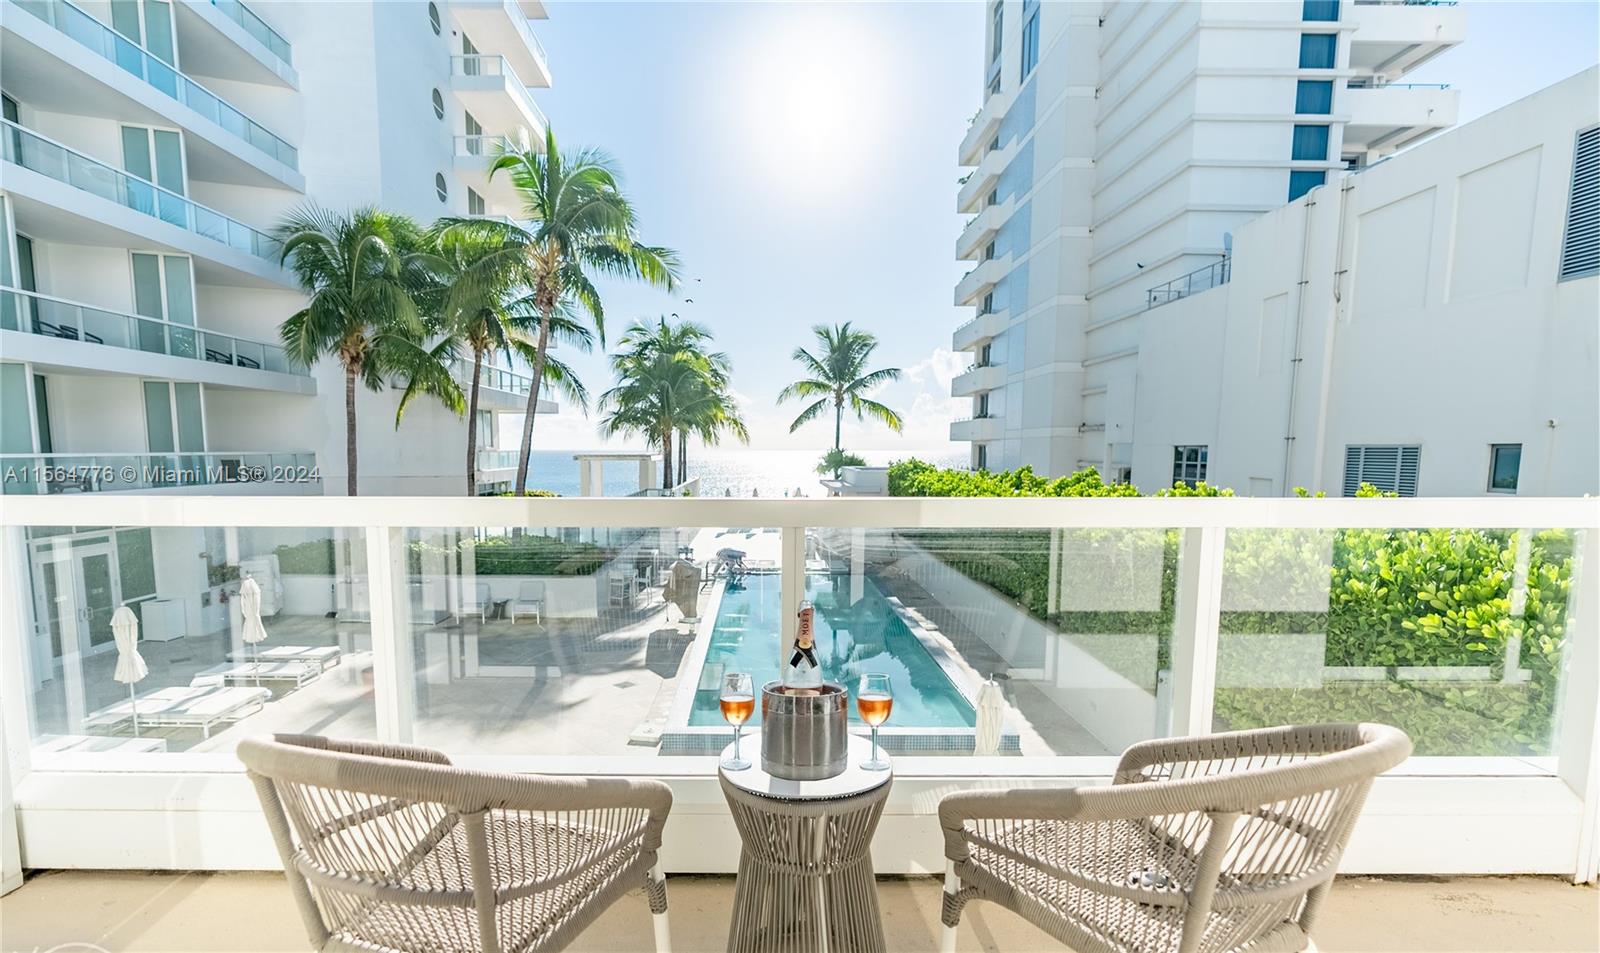 Indulge in the opulence of oceanfront living with this magnificent 1-bedroom, 1.5-bathroom residence at Fontainebleau III. This fully furnished unit boasts captivating views of the ocean, bay, and pool, and features a king bed, sleeper sofa, 2 TVs, a fully equipped kitchen with a dishwasher, washer/dryer, microwave, and a spacious terrace. Take advantage of the hotel rental program to earn income while you're away. Fontainebleau resort spans 22 oceanfront acres and offers an array of luxury amenities, including award-winning restaurants, the renowned LIV night club, the indulgent Lapis spa, and a state-of-the-art fitness center. The maintenance fee covers AC, local calls, electricity, valet service, and daily complimentary breakfast in the owner's lounge.